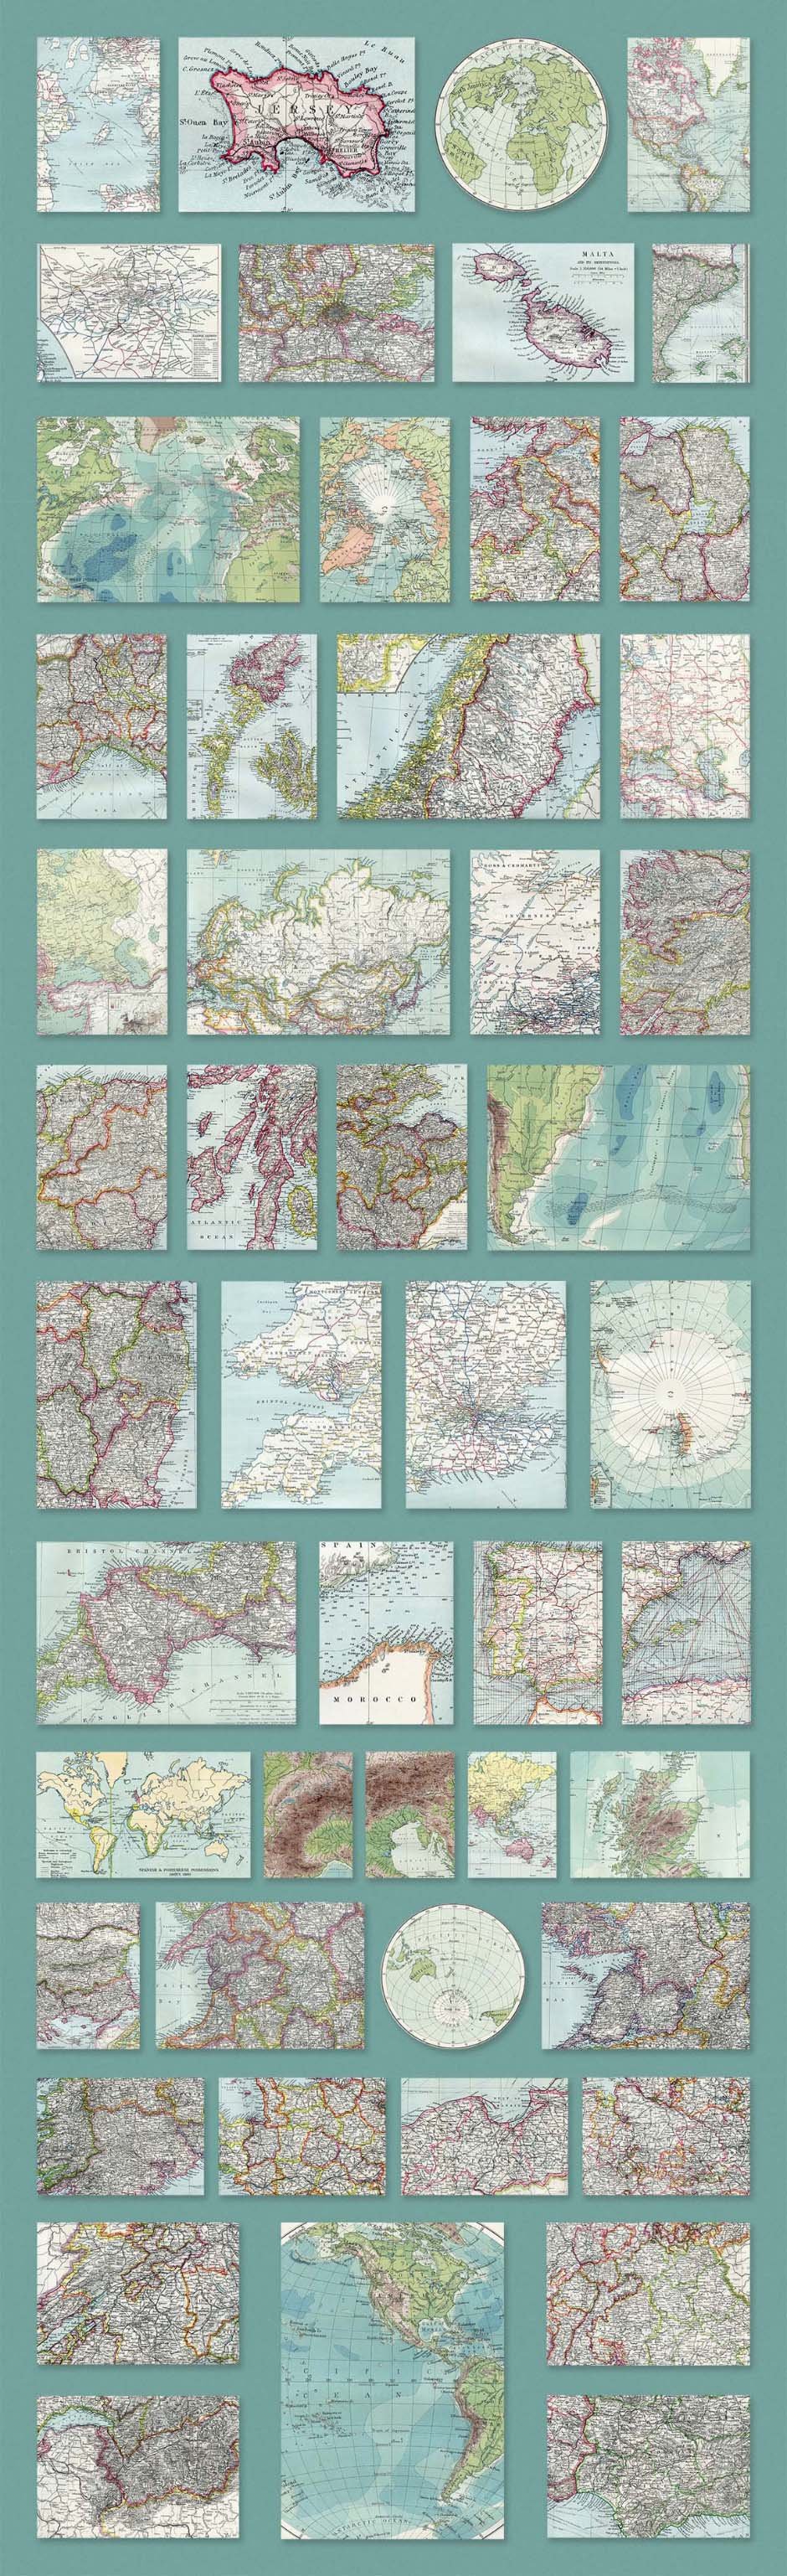 90 Super High-Resolution Vintage Maps Of The World